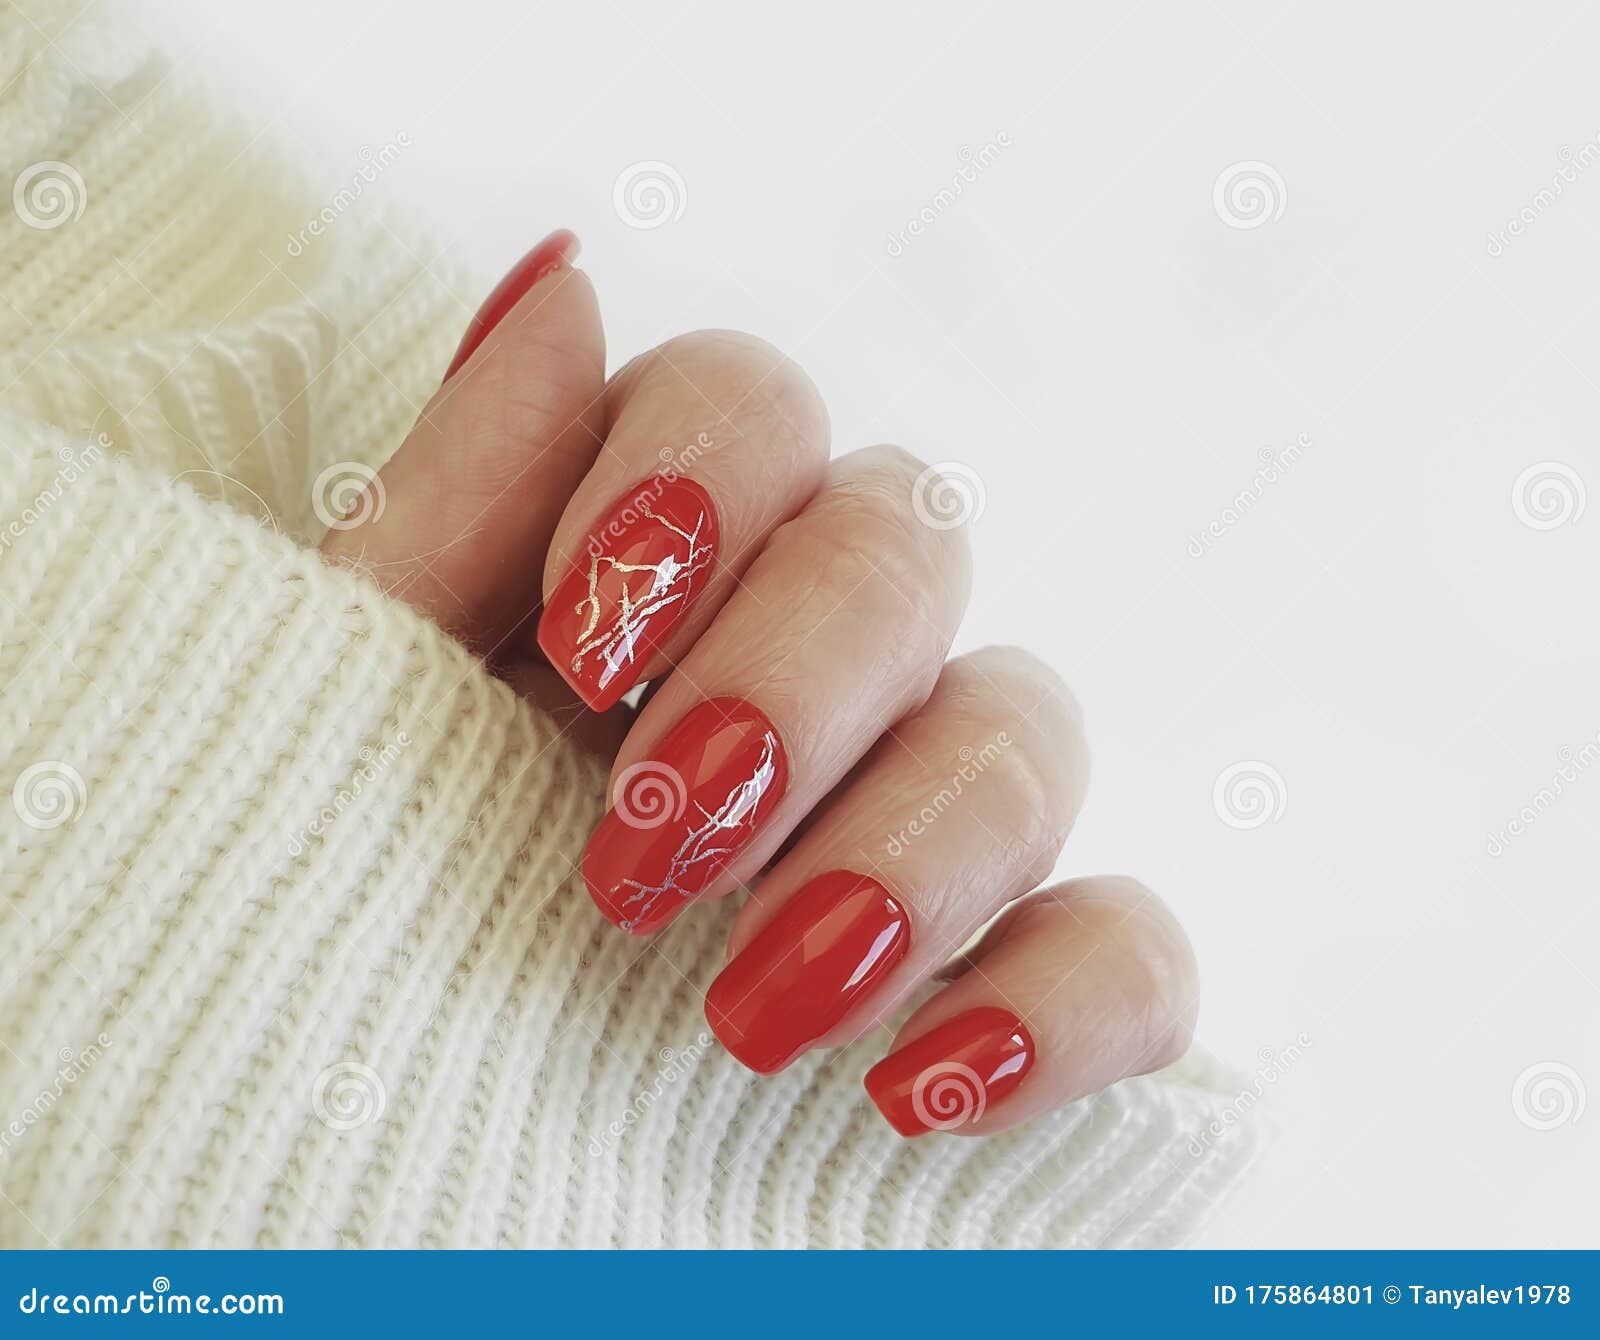 Female Hand Nails Manicure Red Sweater Stock Image - Image of color ...